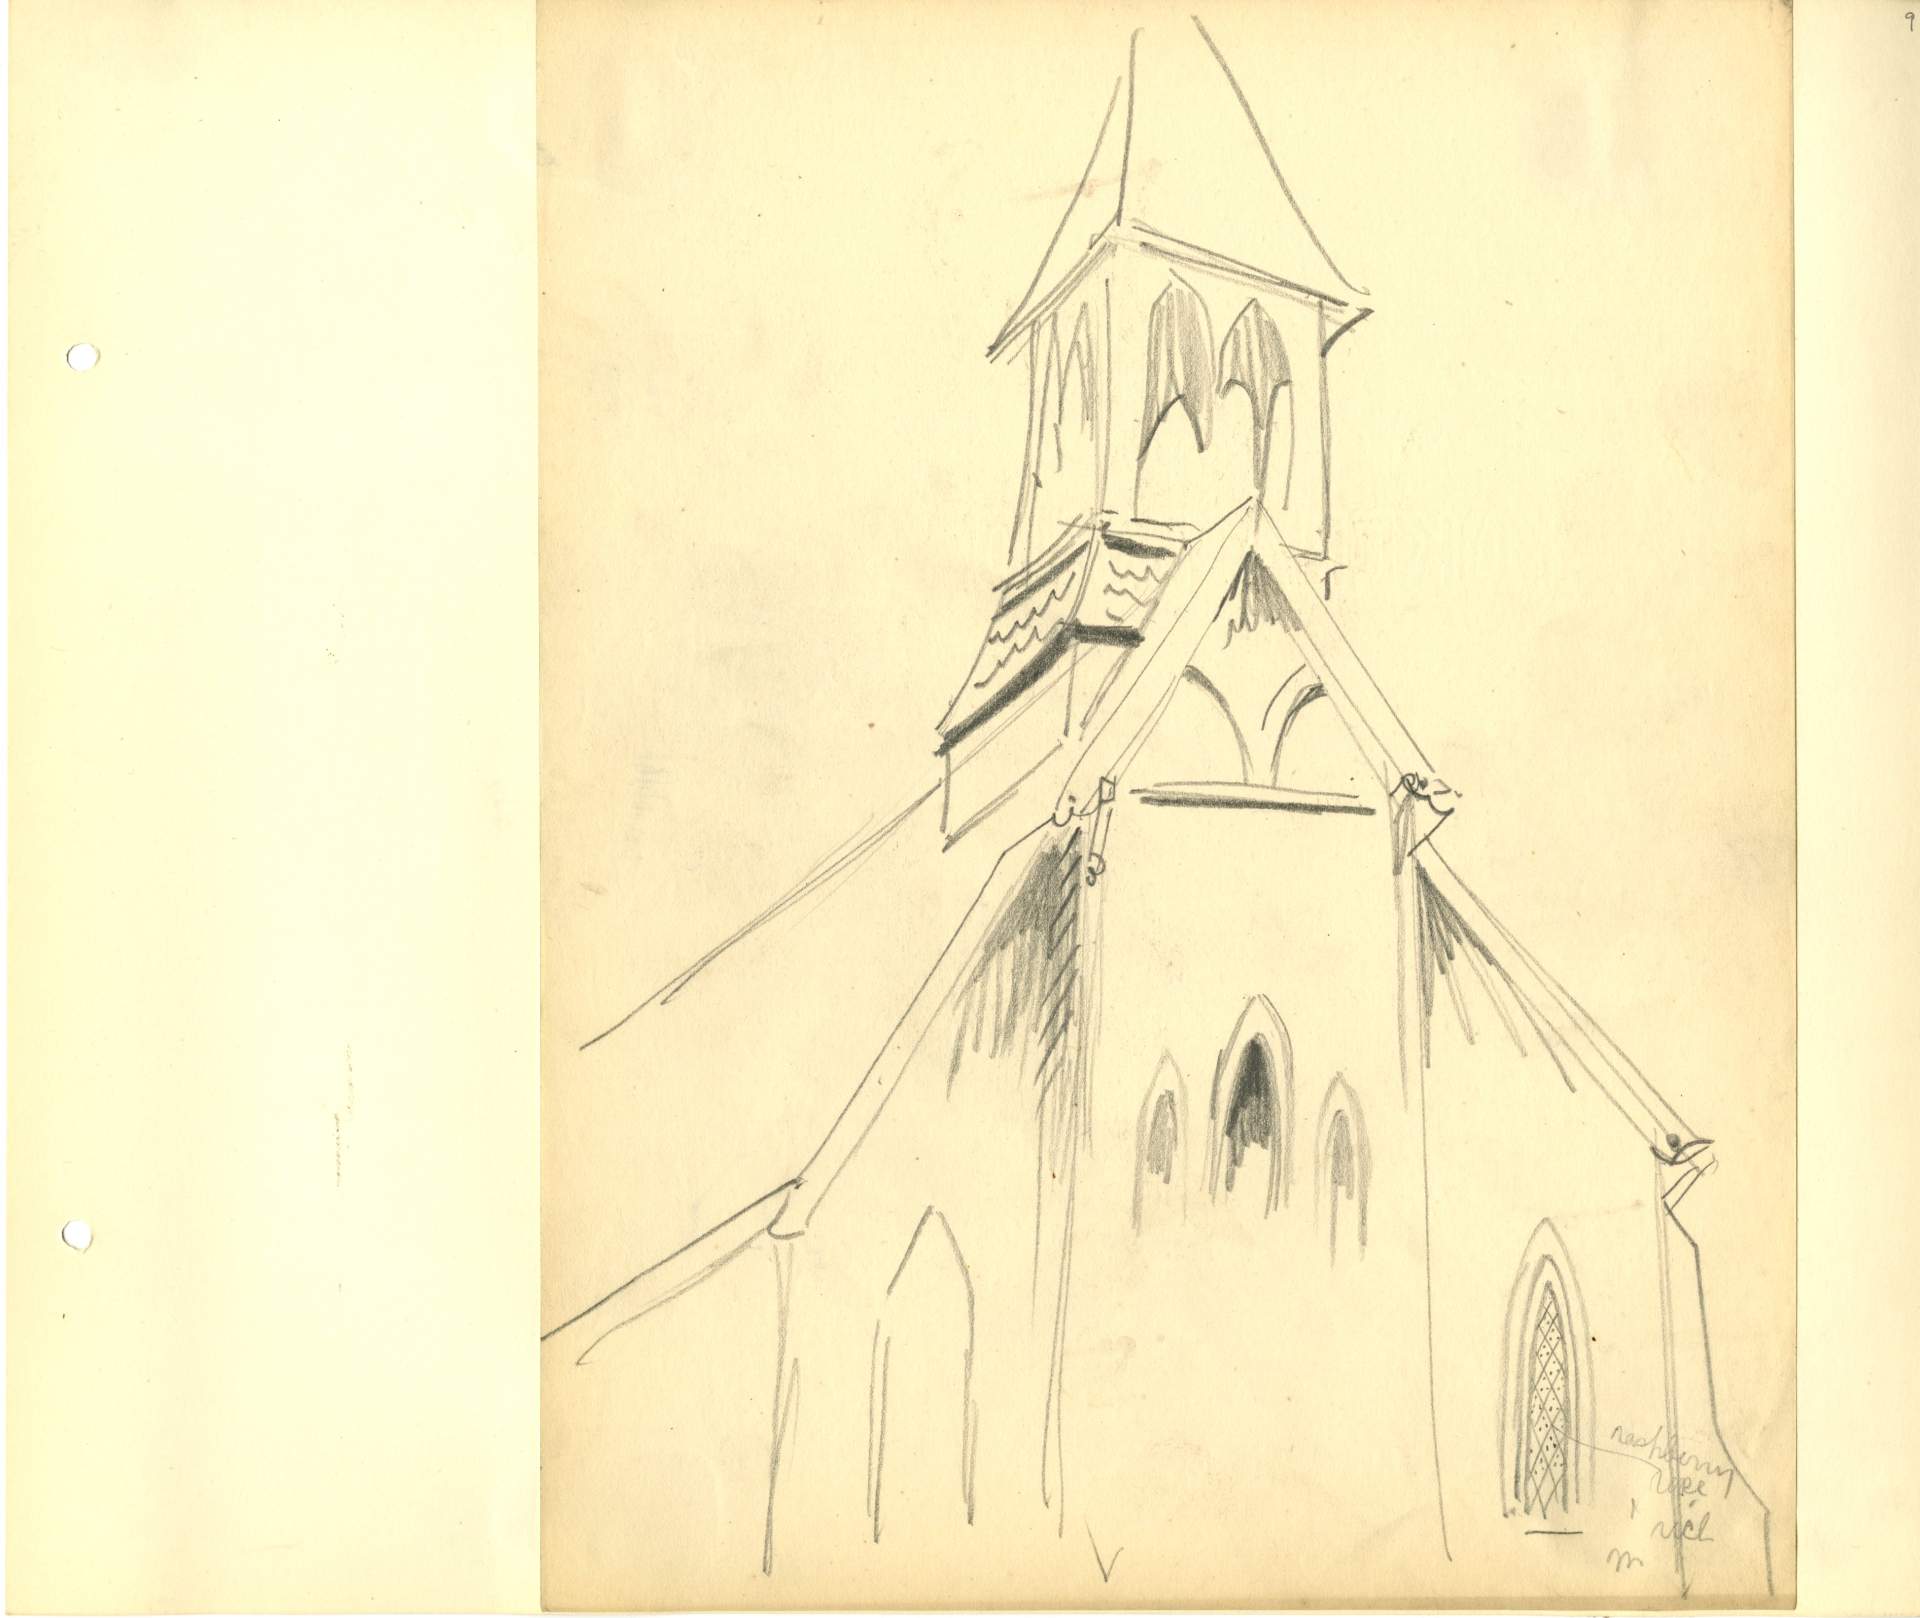 Study of church frontal view